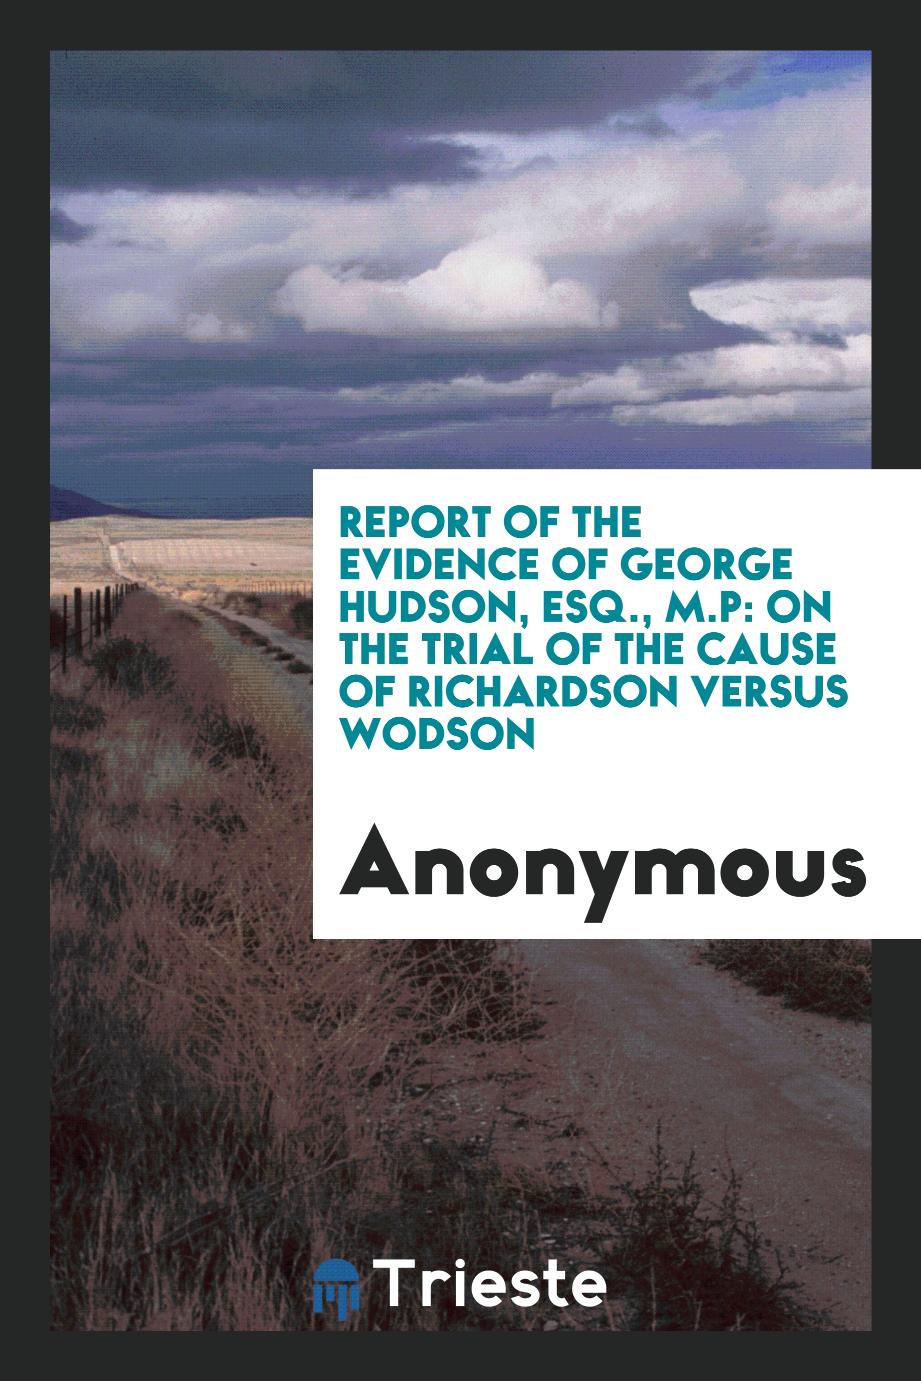 Report of the evidence of George Hudson, Esq., M.P: on the trial of the cause of Richardson versus Wodson